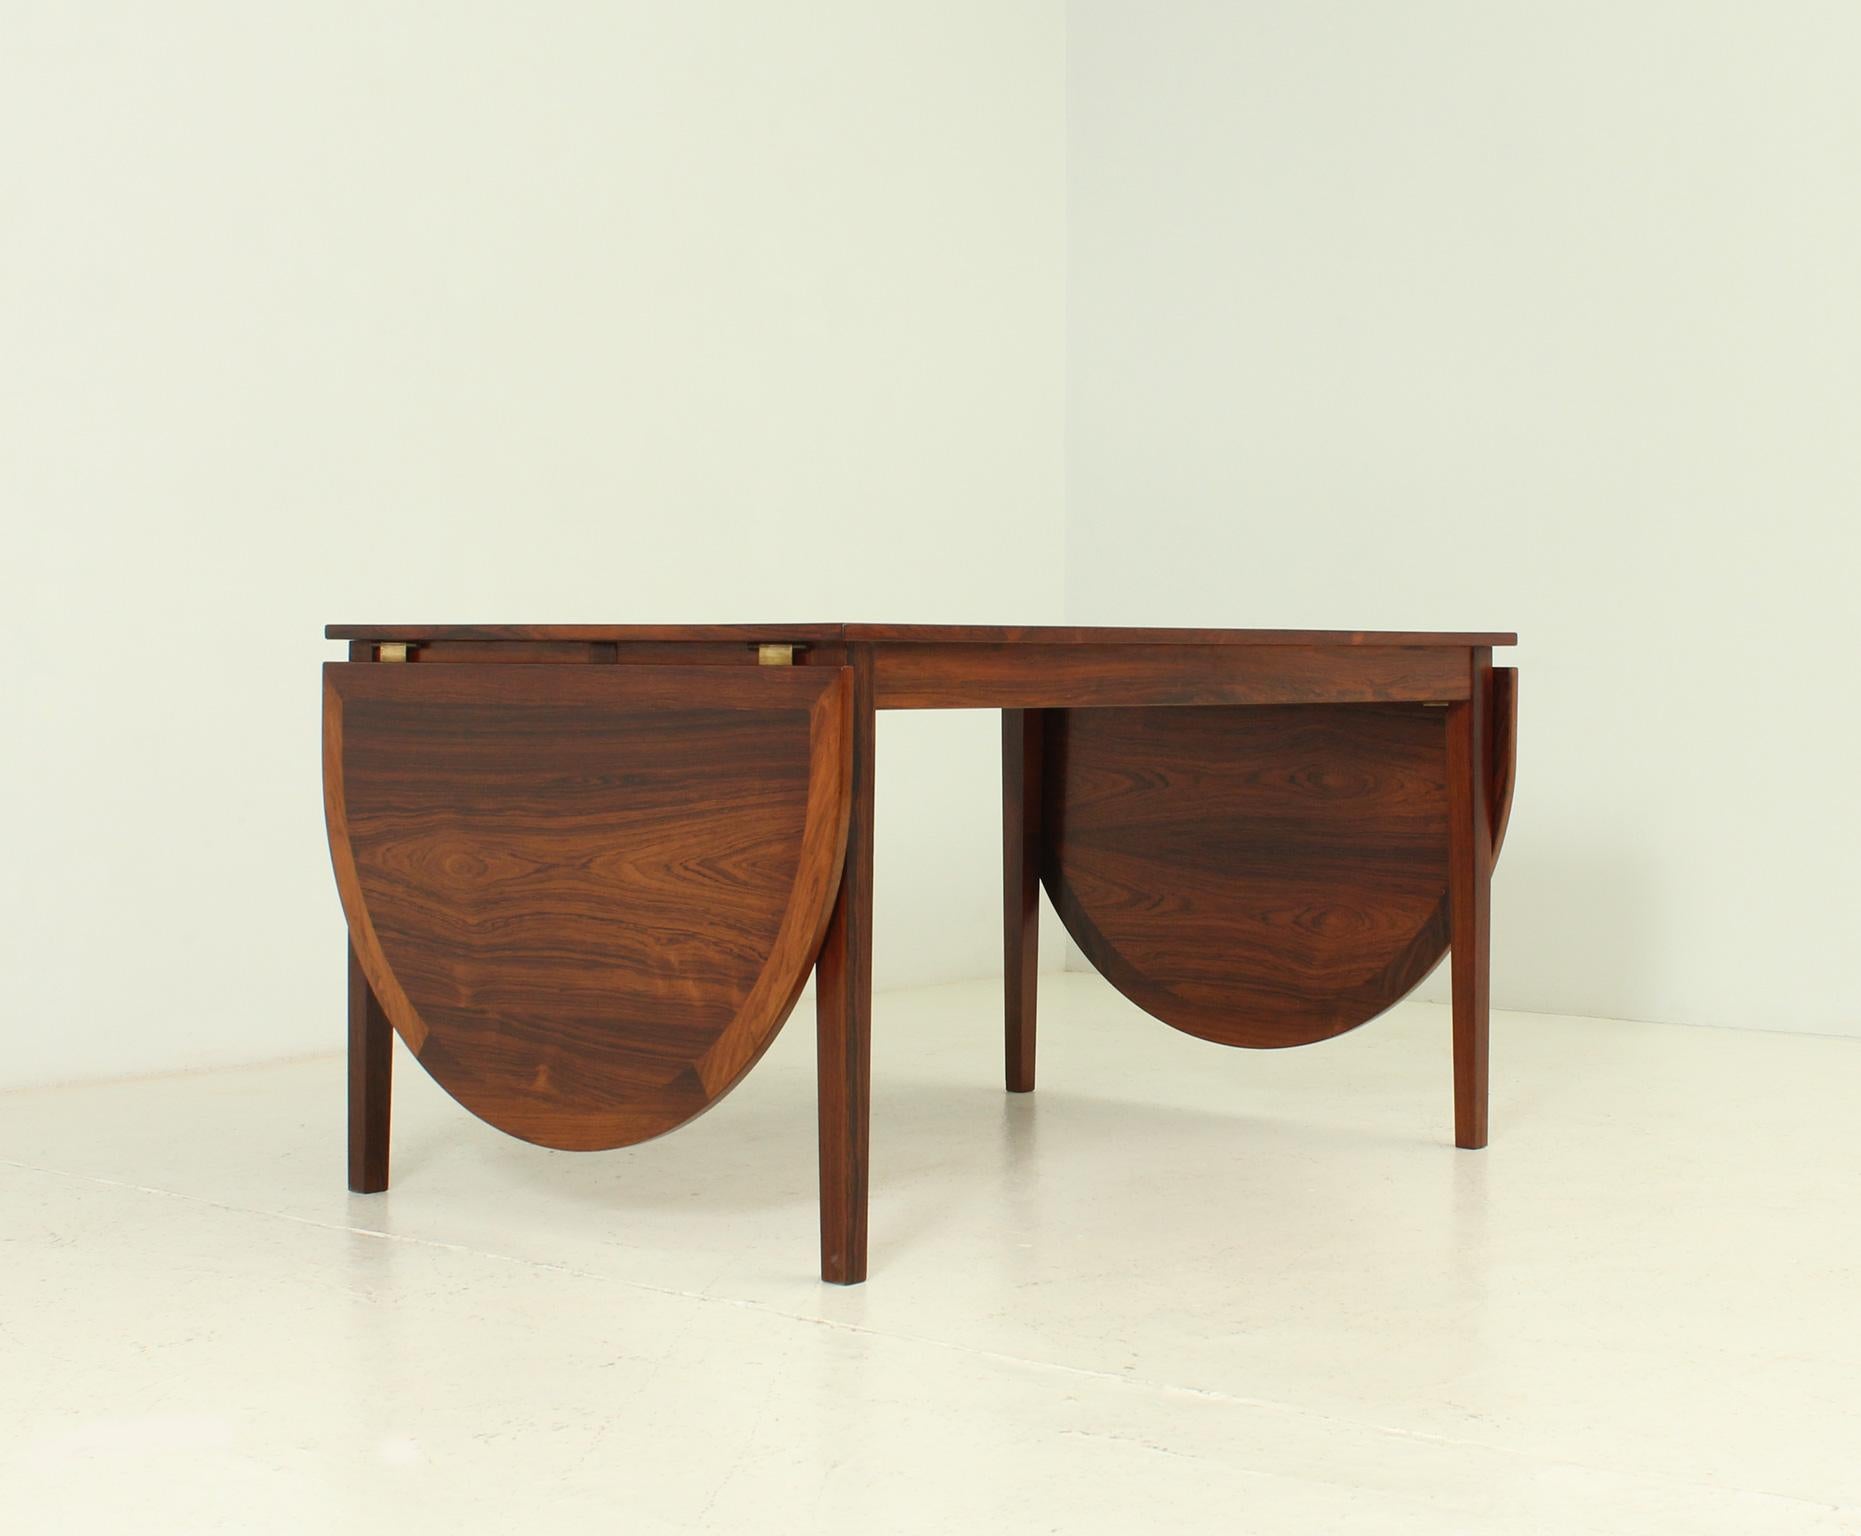 Exceptional dining table designed by Kai Winding in 1960's for Slagelse Möbelvaerk, Denmark. Hardwood with brass and leather fittings with two removable drop leaves. Easy opening with one or two leaves with 130/185/240 cm long when open.
   